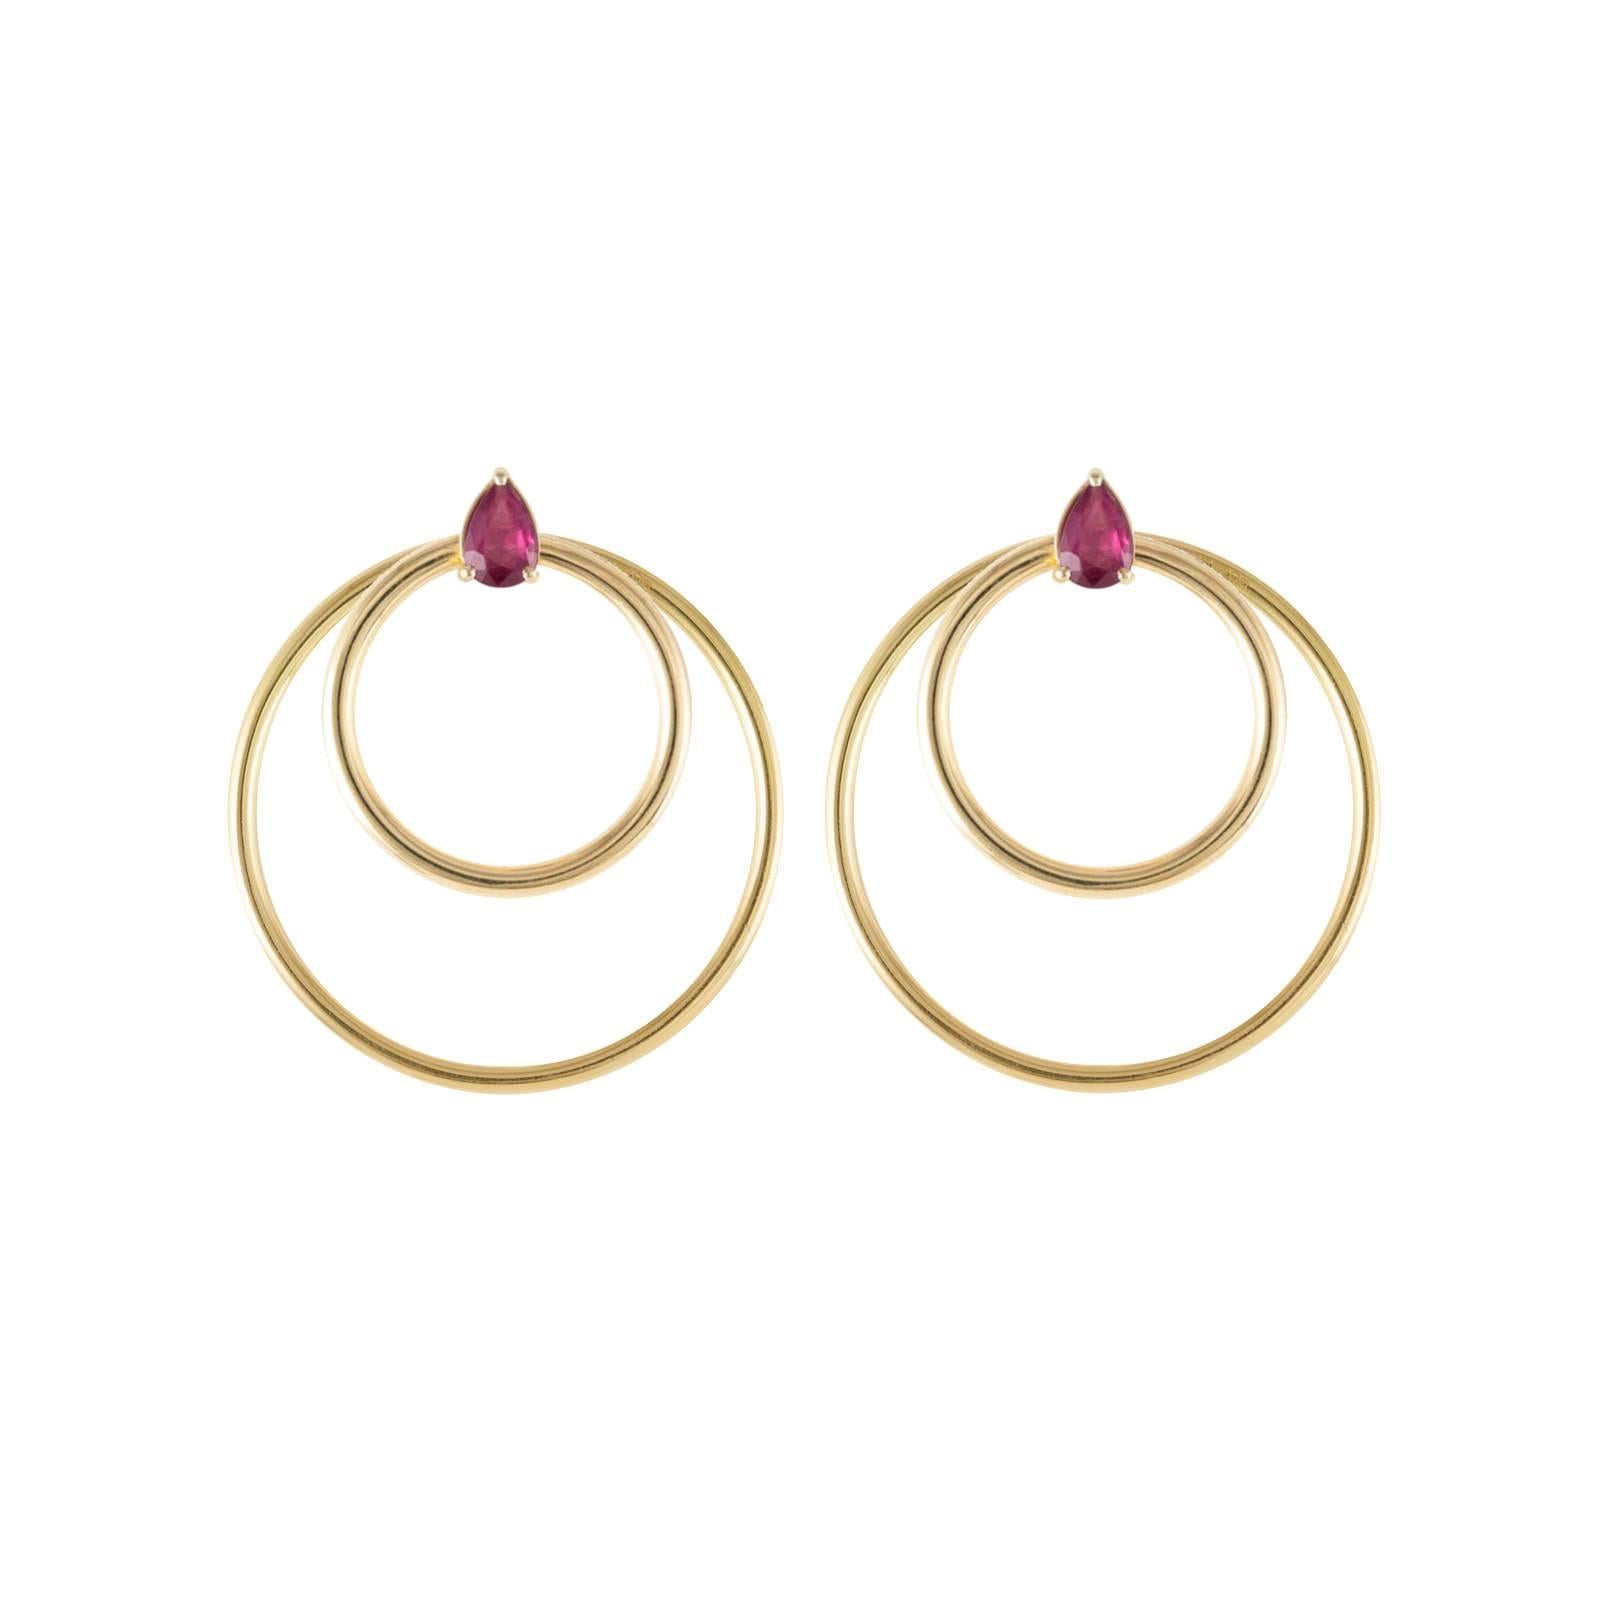 Contemporary Daou Ruby Pear and Gold Hoop Earrings from the Orbit Collection For Sale